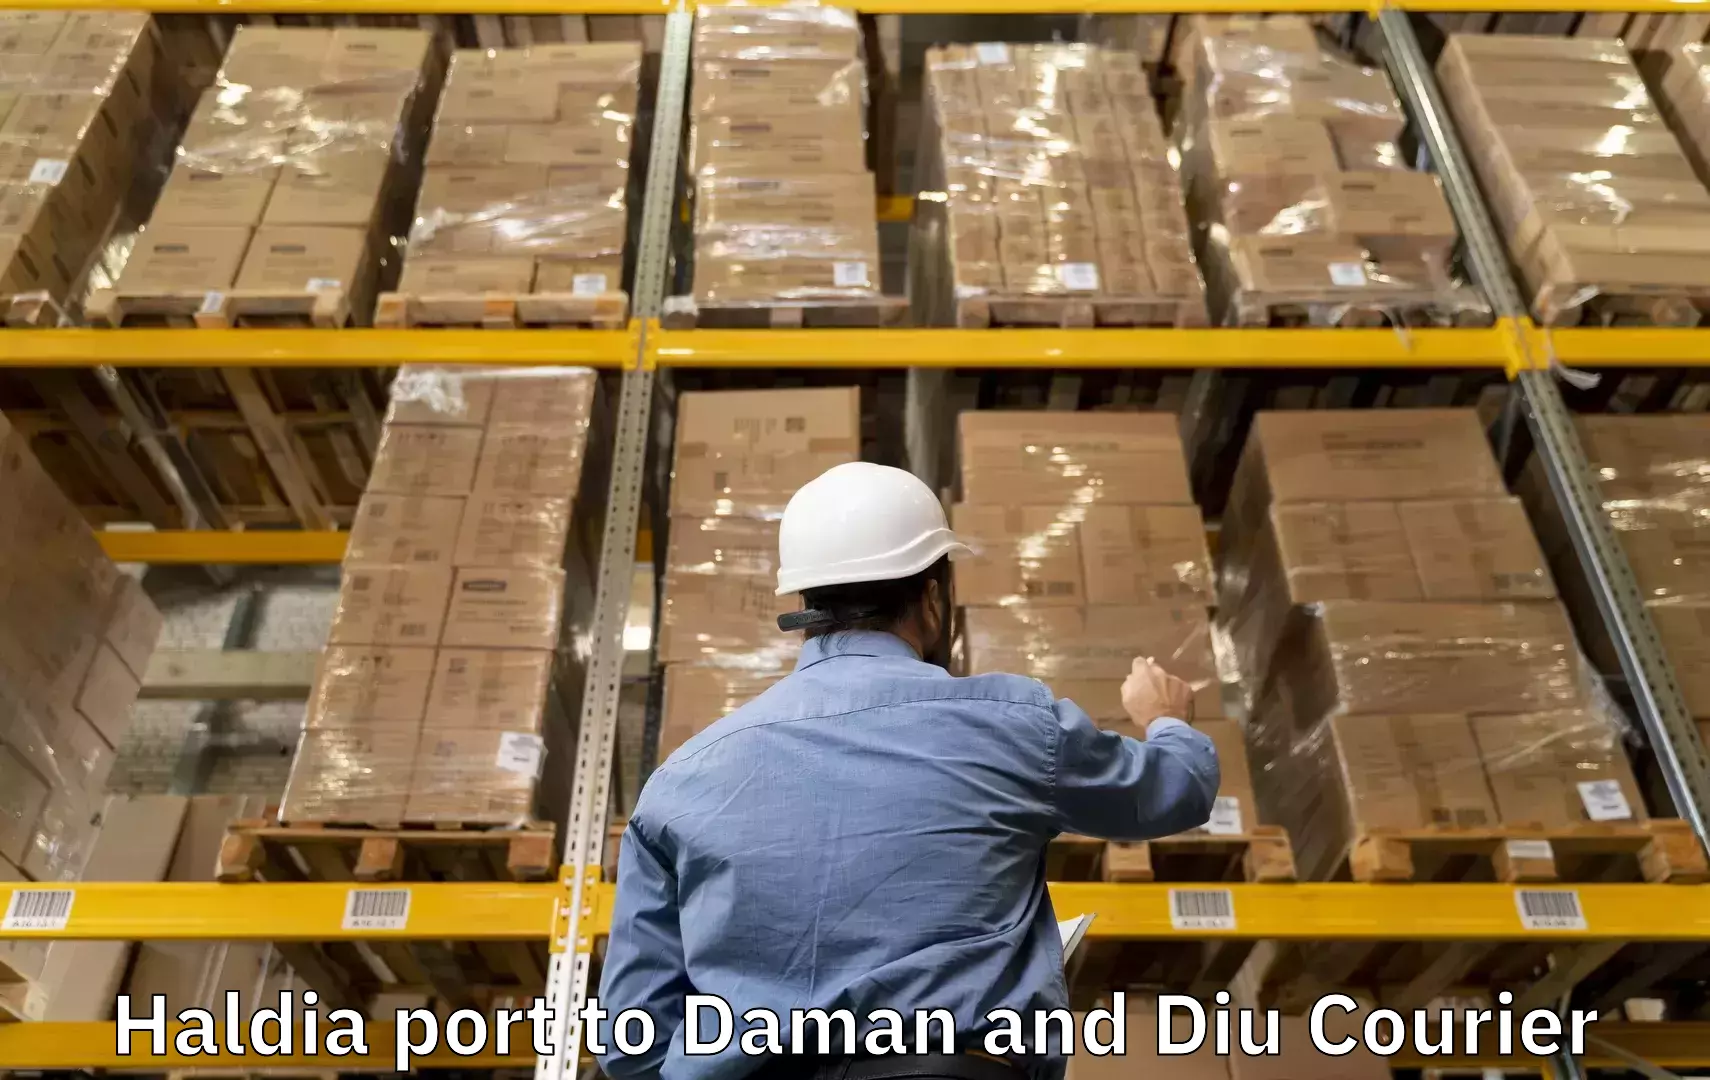 Luggage delivery network Haldia port to Daman and Diu